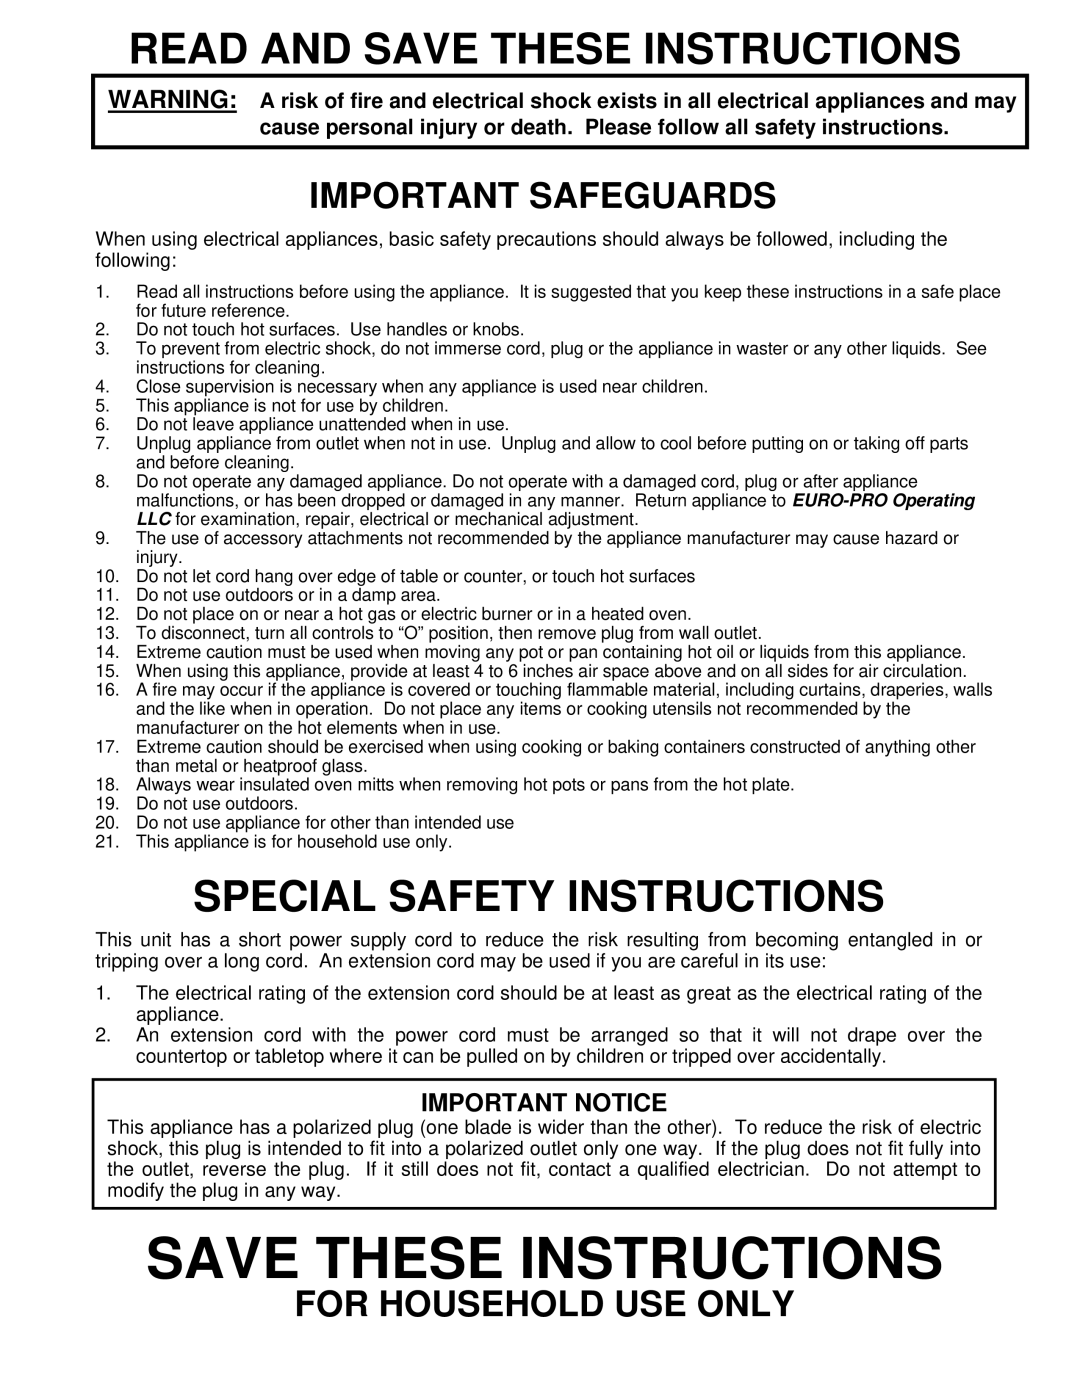 Bravetti EP836 Read And Save These Instructions, Special Safety Instructions, Important Safeguards, For Household Use Only 